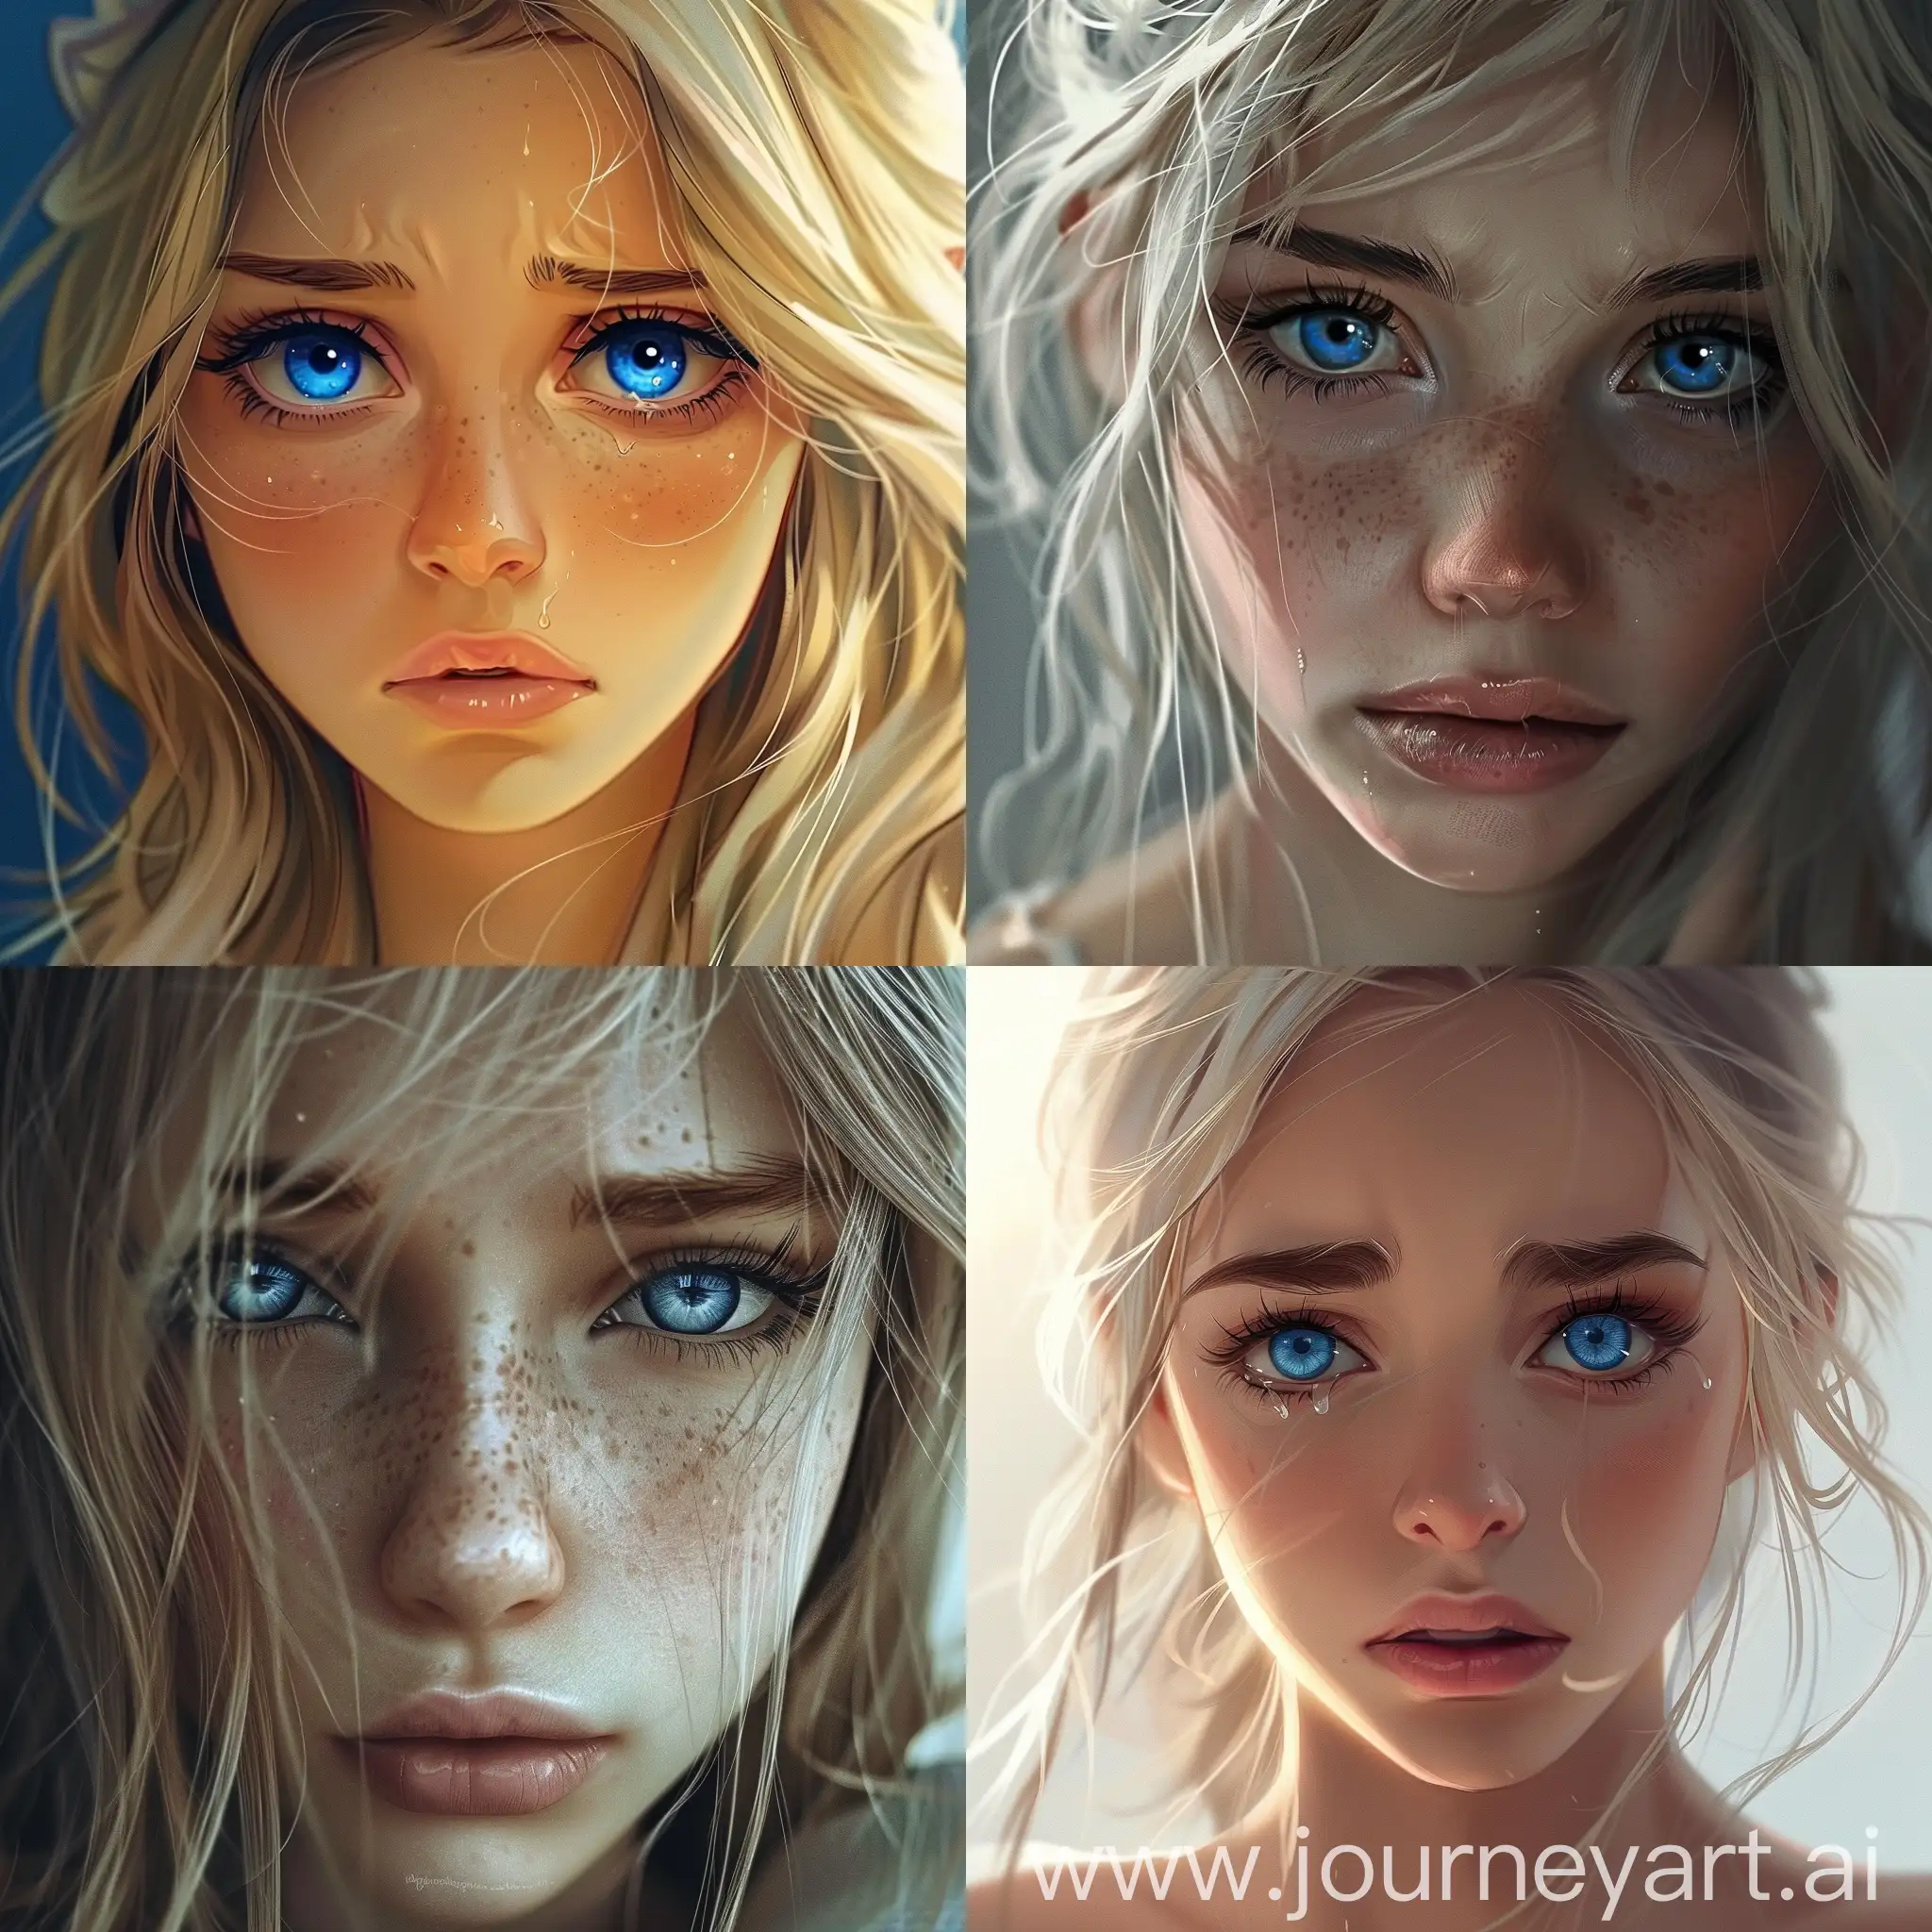 Beautiful-Sad-Girl-with-Blue-Eyes-and-Light-Hair-Portrait